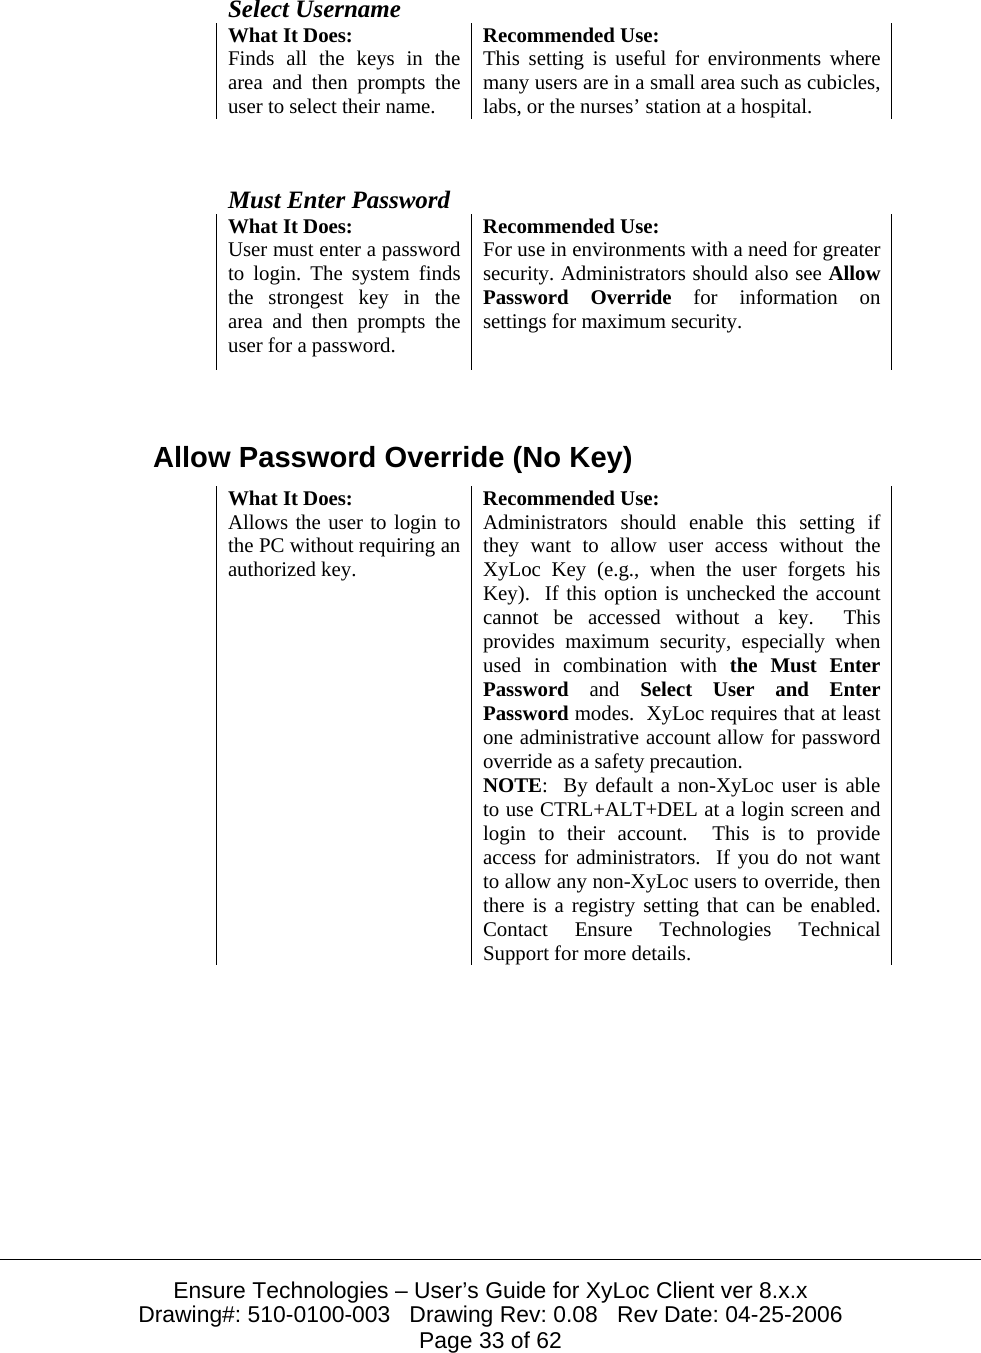  Ensure Technologies – User’s Guide for XyLoc Client ver 8.x.x Drawing#: 510-0100-003   Drawing Rev: 0.08   Rev Date: 04-25-2006 Page 33 of 62   Select Username What It Does:  Recommended Use: Finds all the keys in the area and then prompts the user to select their name. This setting is useful for environments where many users are in a small area such as cubicles, labs, or the nurses’ station at a hospital.  Must Enter Password What It Does:  Recommended Use: User must enter a password to login. The system finds the strongest key in the area and then prompts the user for a password.  For use in environments with a need for greater security. Administrators should also see Allow Password Override for information on settings for maximum security.   Allow Password Override (No Key) What It Does:  Recommended Use: Allows the user to login to the PC without requiring an authorized key. Administrators should enable this setting if they want to allow user access without the XyLoc Key (e.g., when the user forgets his Key).  If this option is unchecked the account cannot be accessed without a key.  This provides maximum security, especially when used in combination with the Must Enter Password and Select User and Enter Password modes.  XyLoc requires that at least one administrative account allow for password override as a safety precaution. NOTE:  By default a non-XyLoc user is able to use CTRL+ALT+DEL at a login screen and login to their account.  This is to provide access for administrators.  If you do not want to allow any non-XyLoc users to override, then there is a registry setting that can be enabled.  Contact Ensure Technologies Technical Support for more details.    